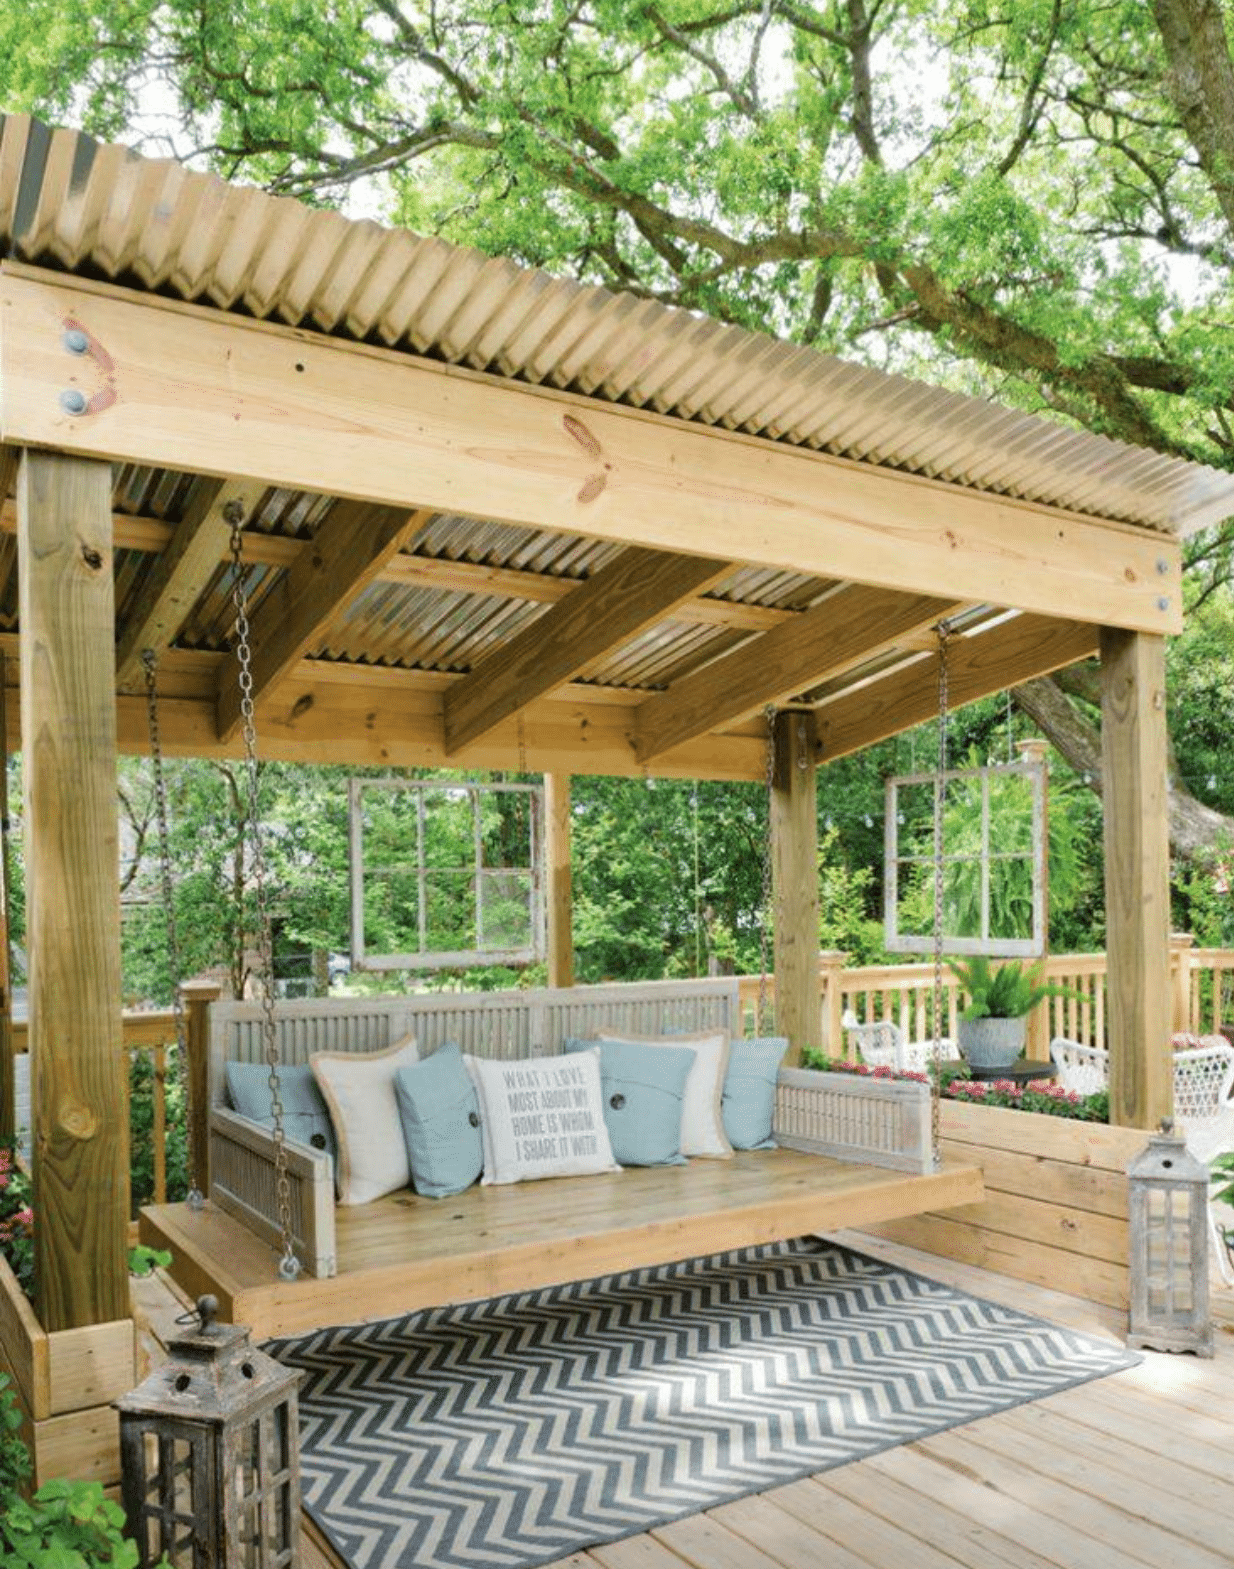 Bright outdoor seating with storage container roof